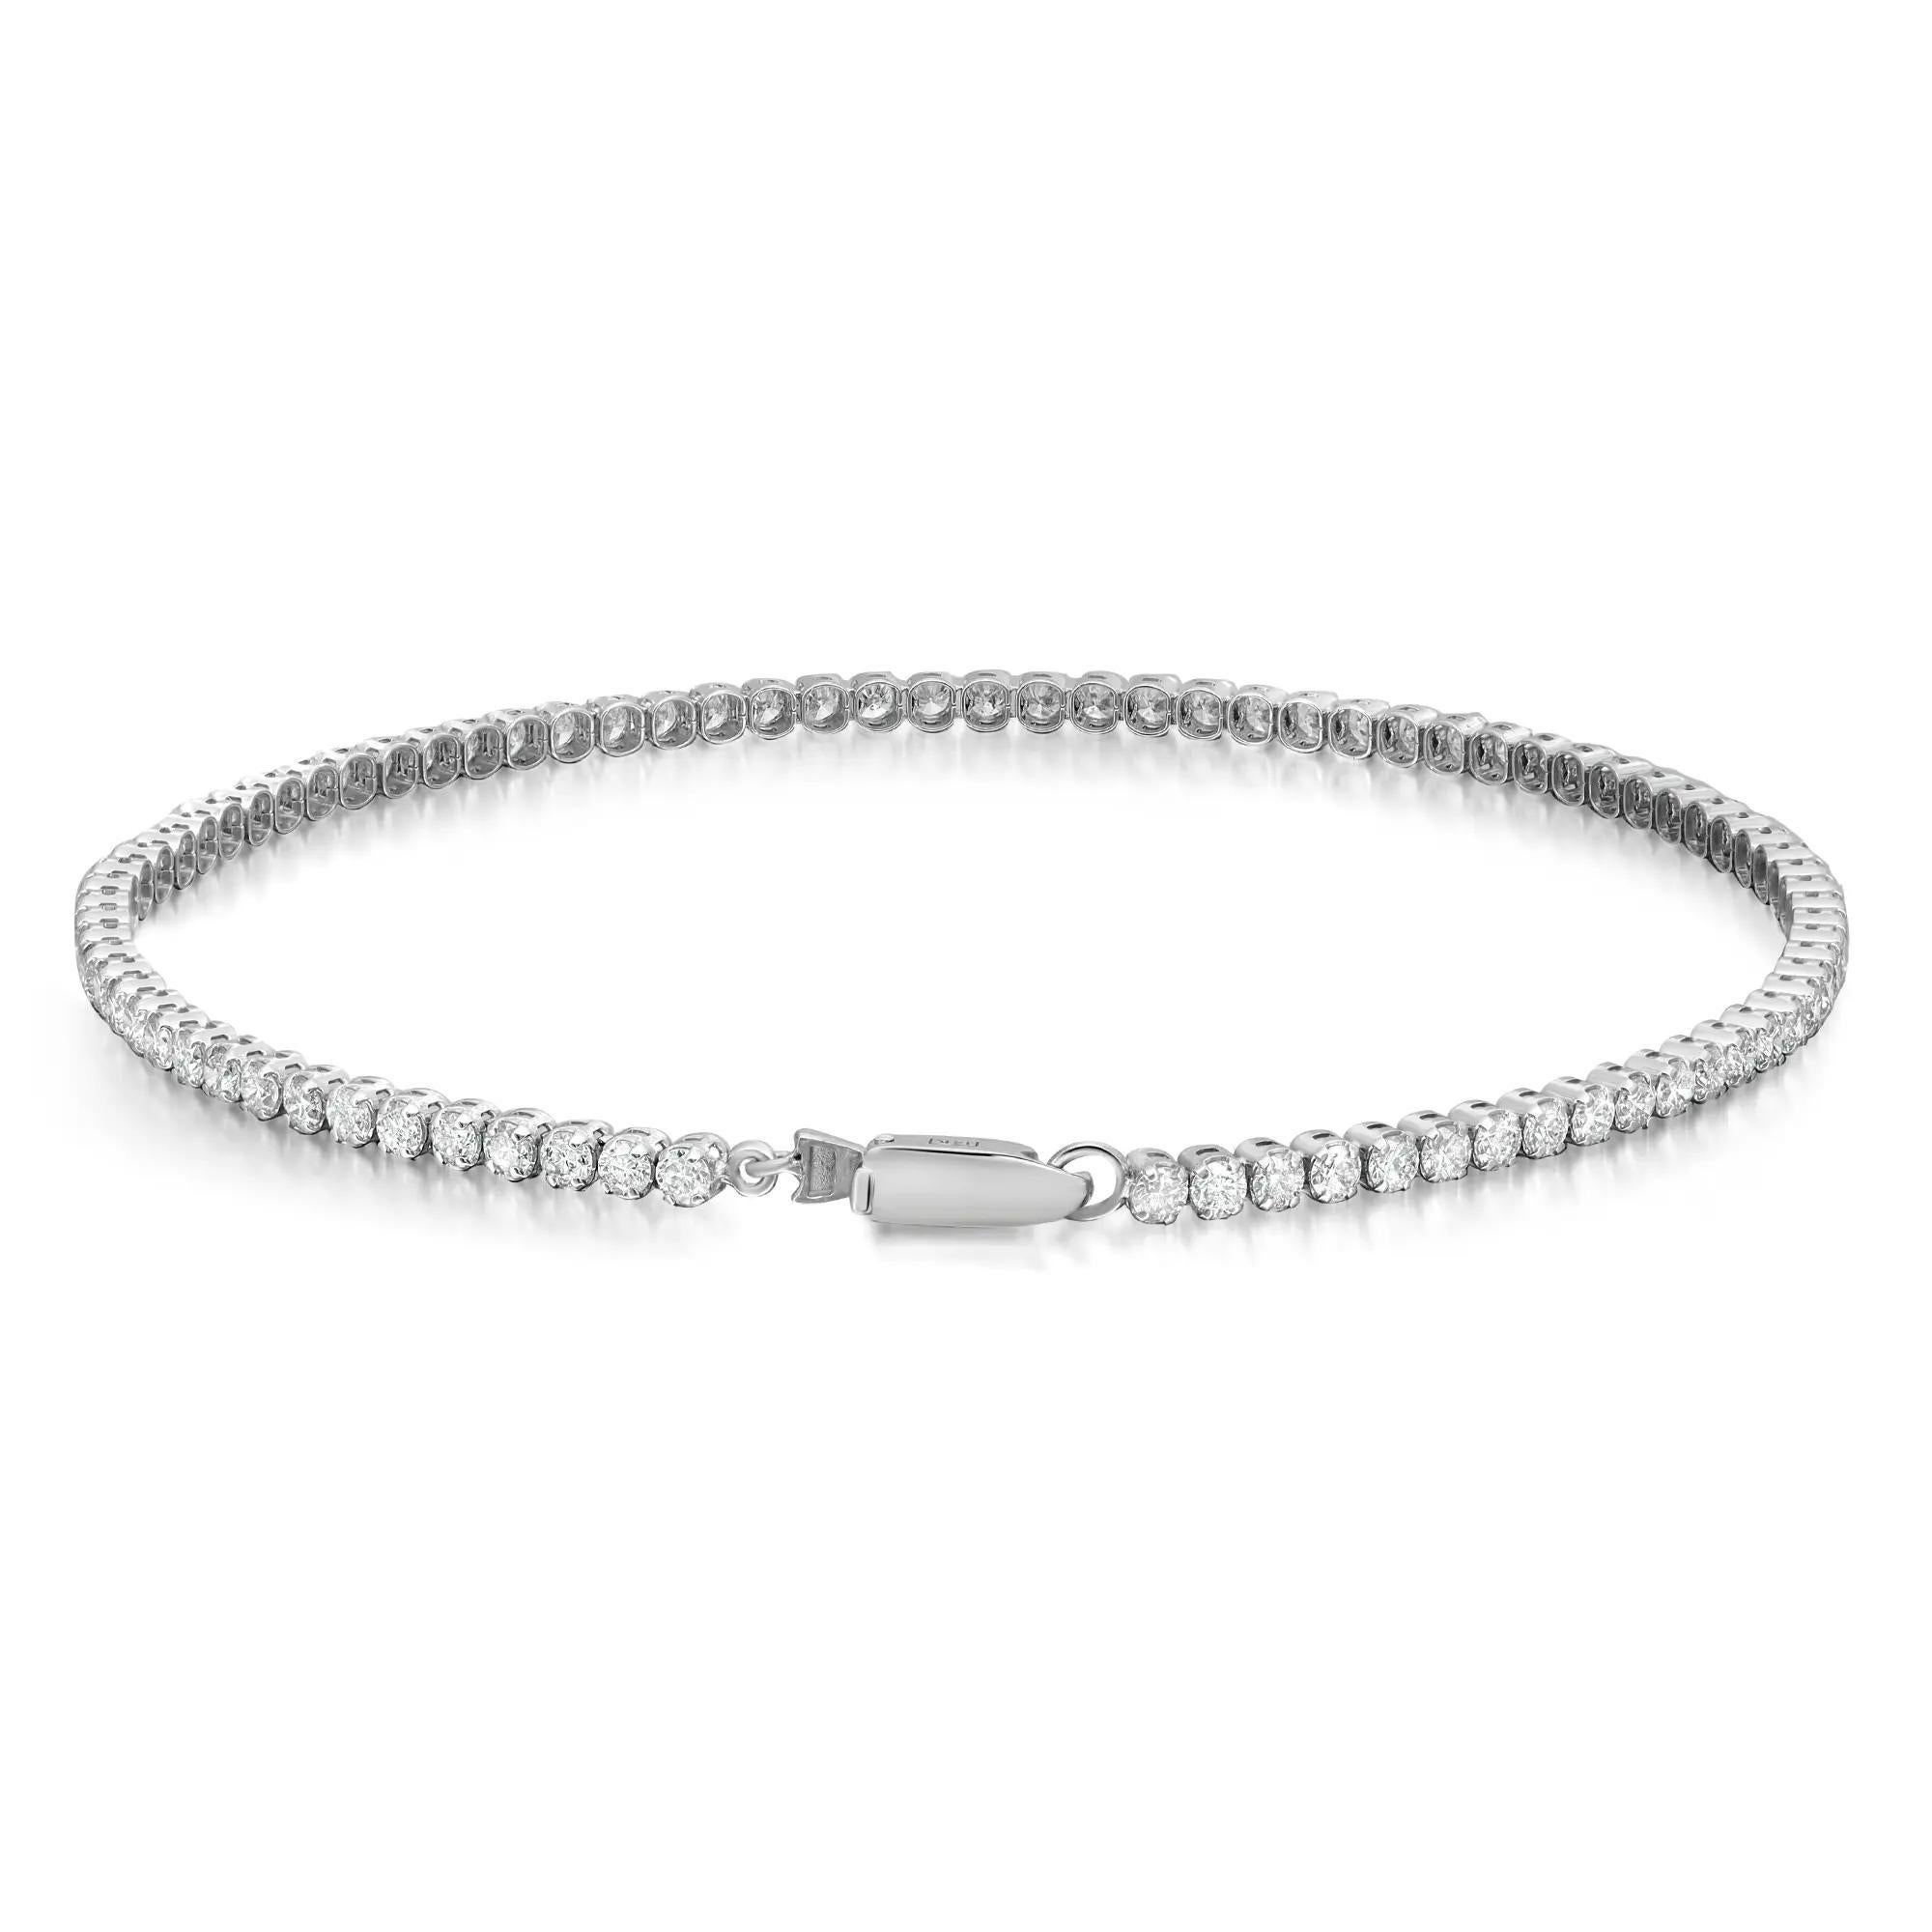 Add a touch of sparkle to your wrist with this beautiful and shimmering prong set round brilliant cut diamond tennis bracelet. Crafted in 14K white gold. Super stackable and easy to wear. Total diamond weight: 2.02 carats. Diamond color G-H and